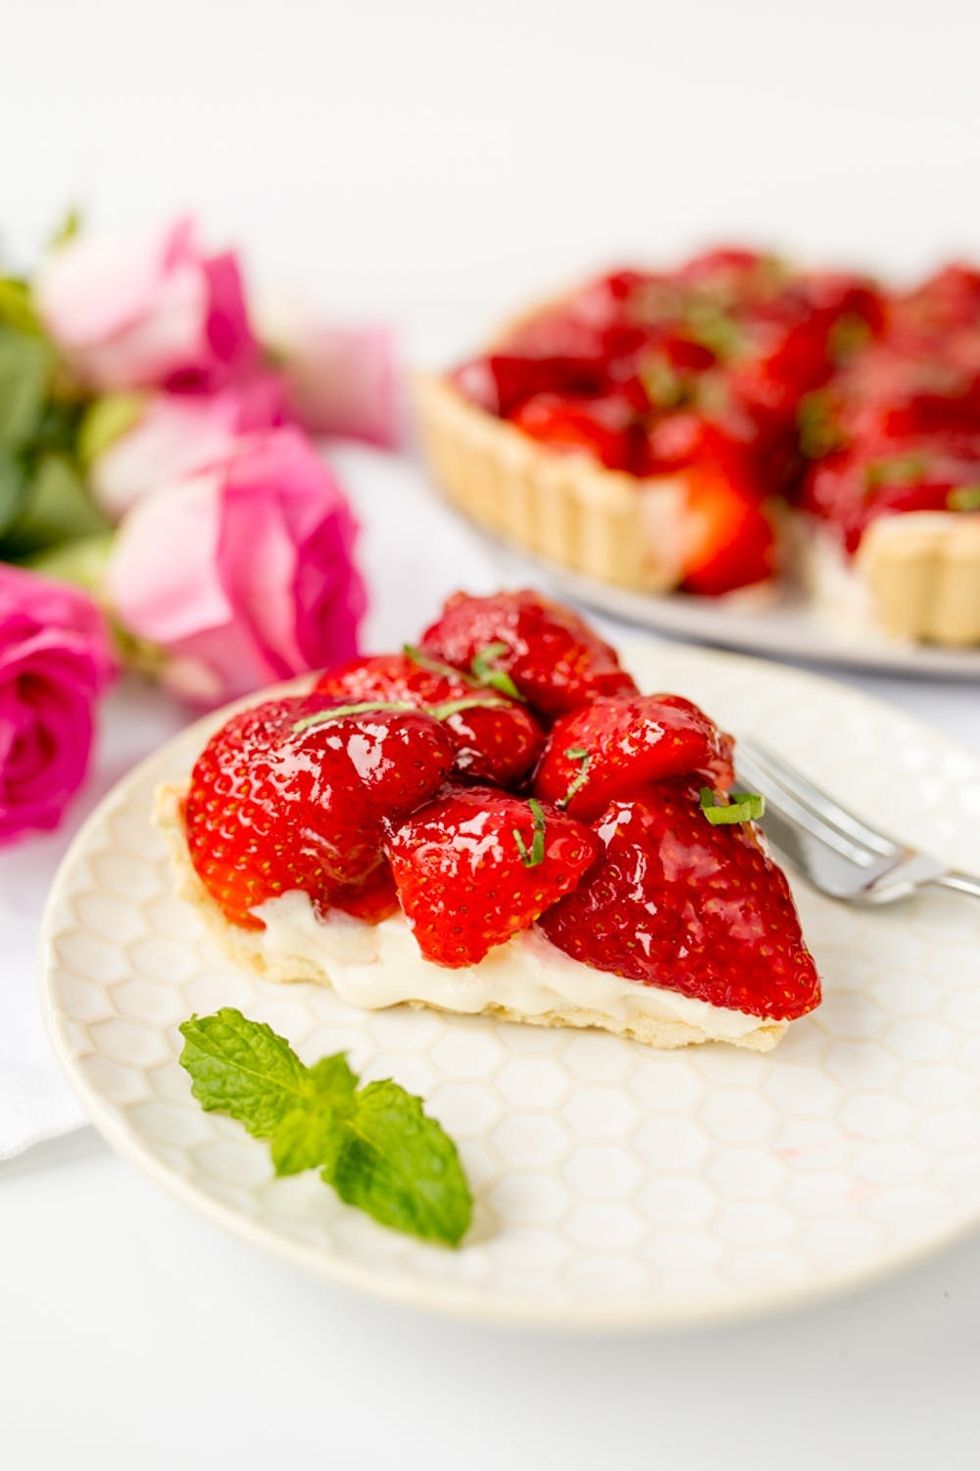 Forgot Mother's Day? This Last-Minute Strawberry Tart Recipe Will Get You Out Of Trouble!